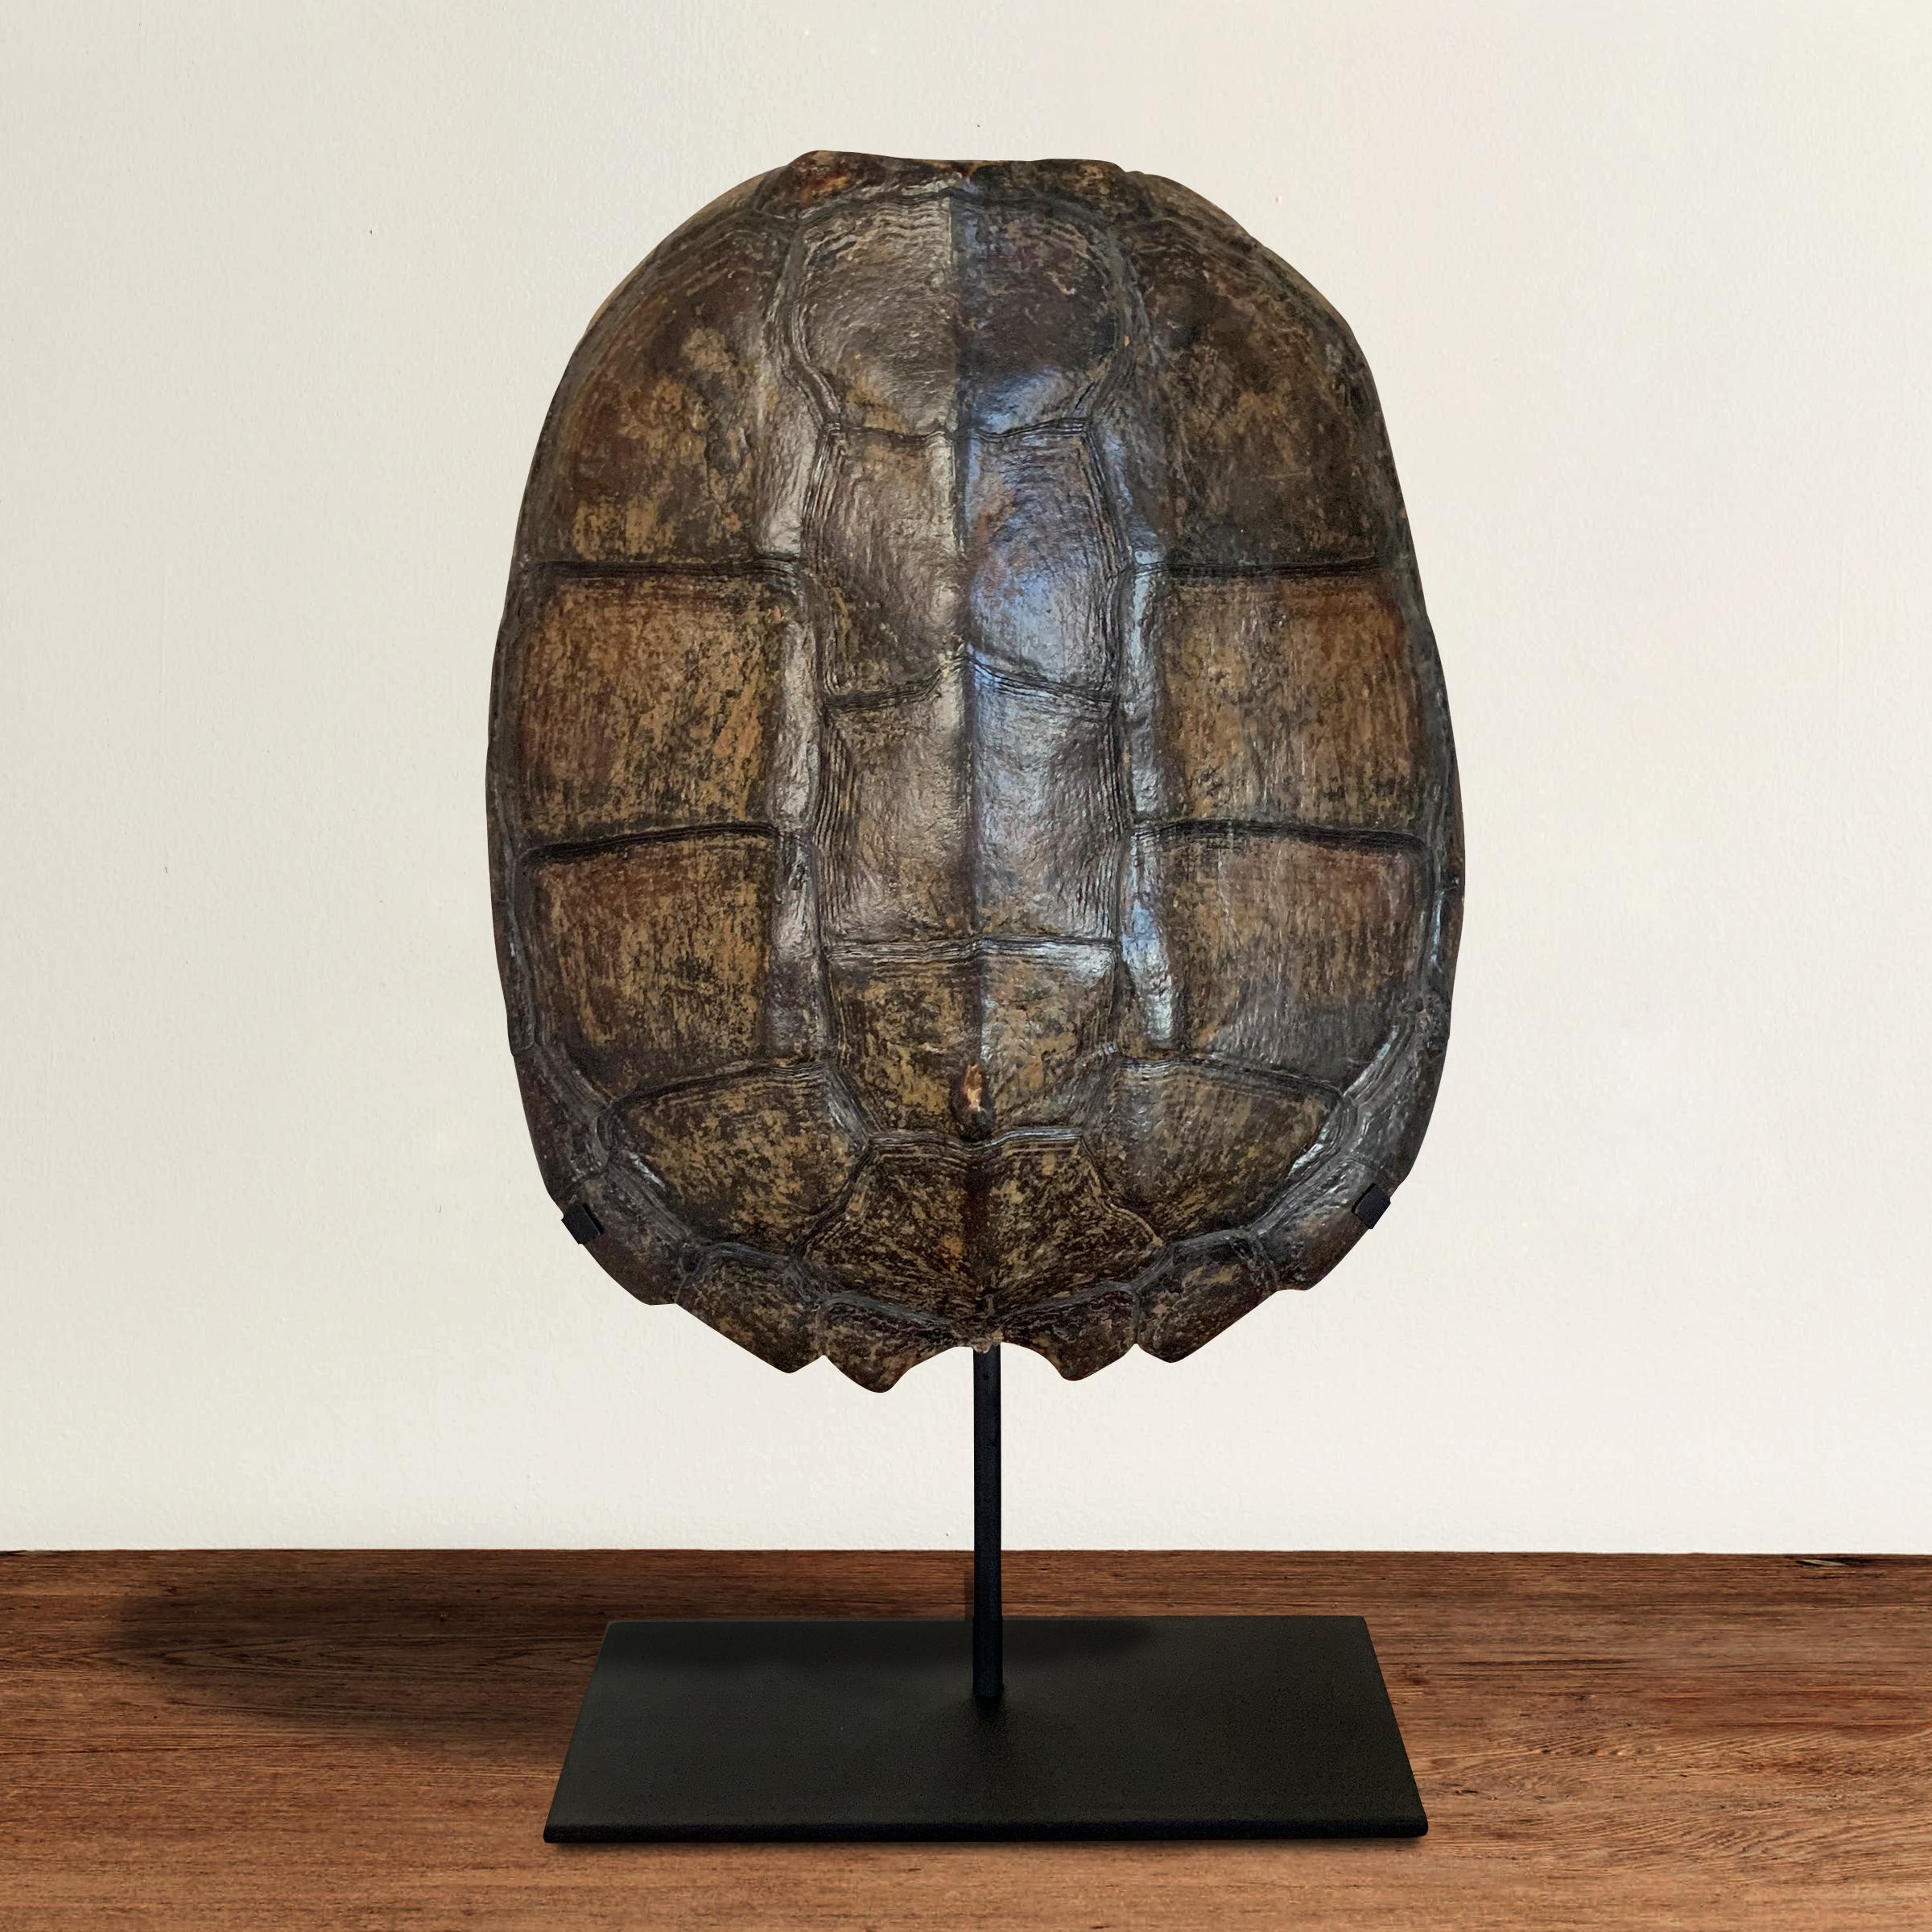 A beautiful American snapping turtle shell with a wonderful pattern and patina mounted on a custom steel stand.